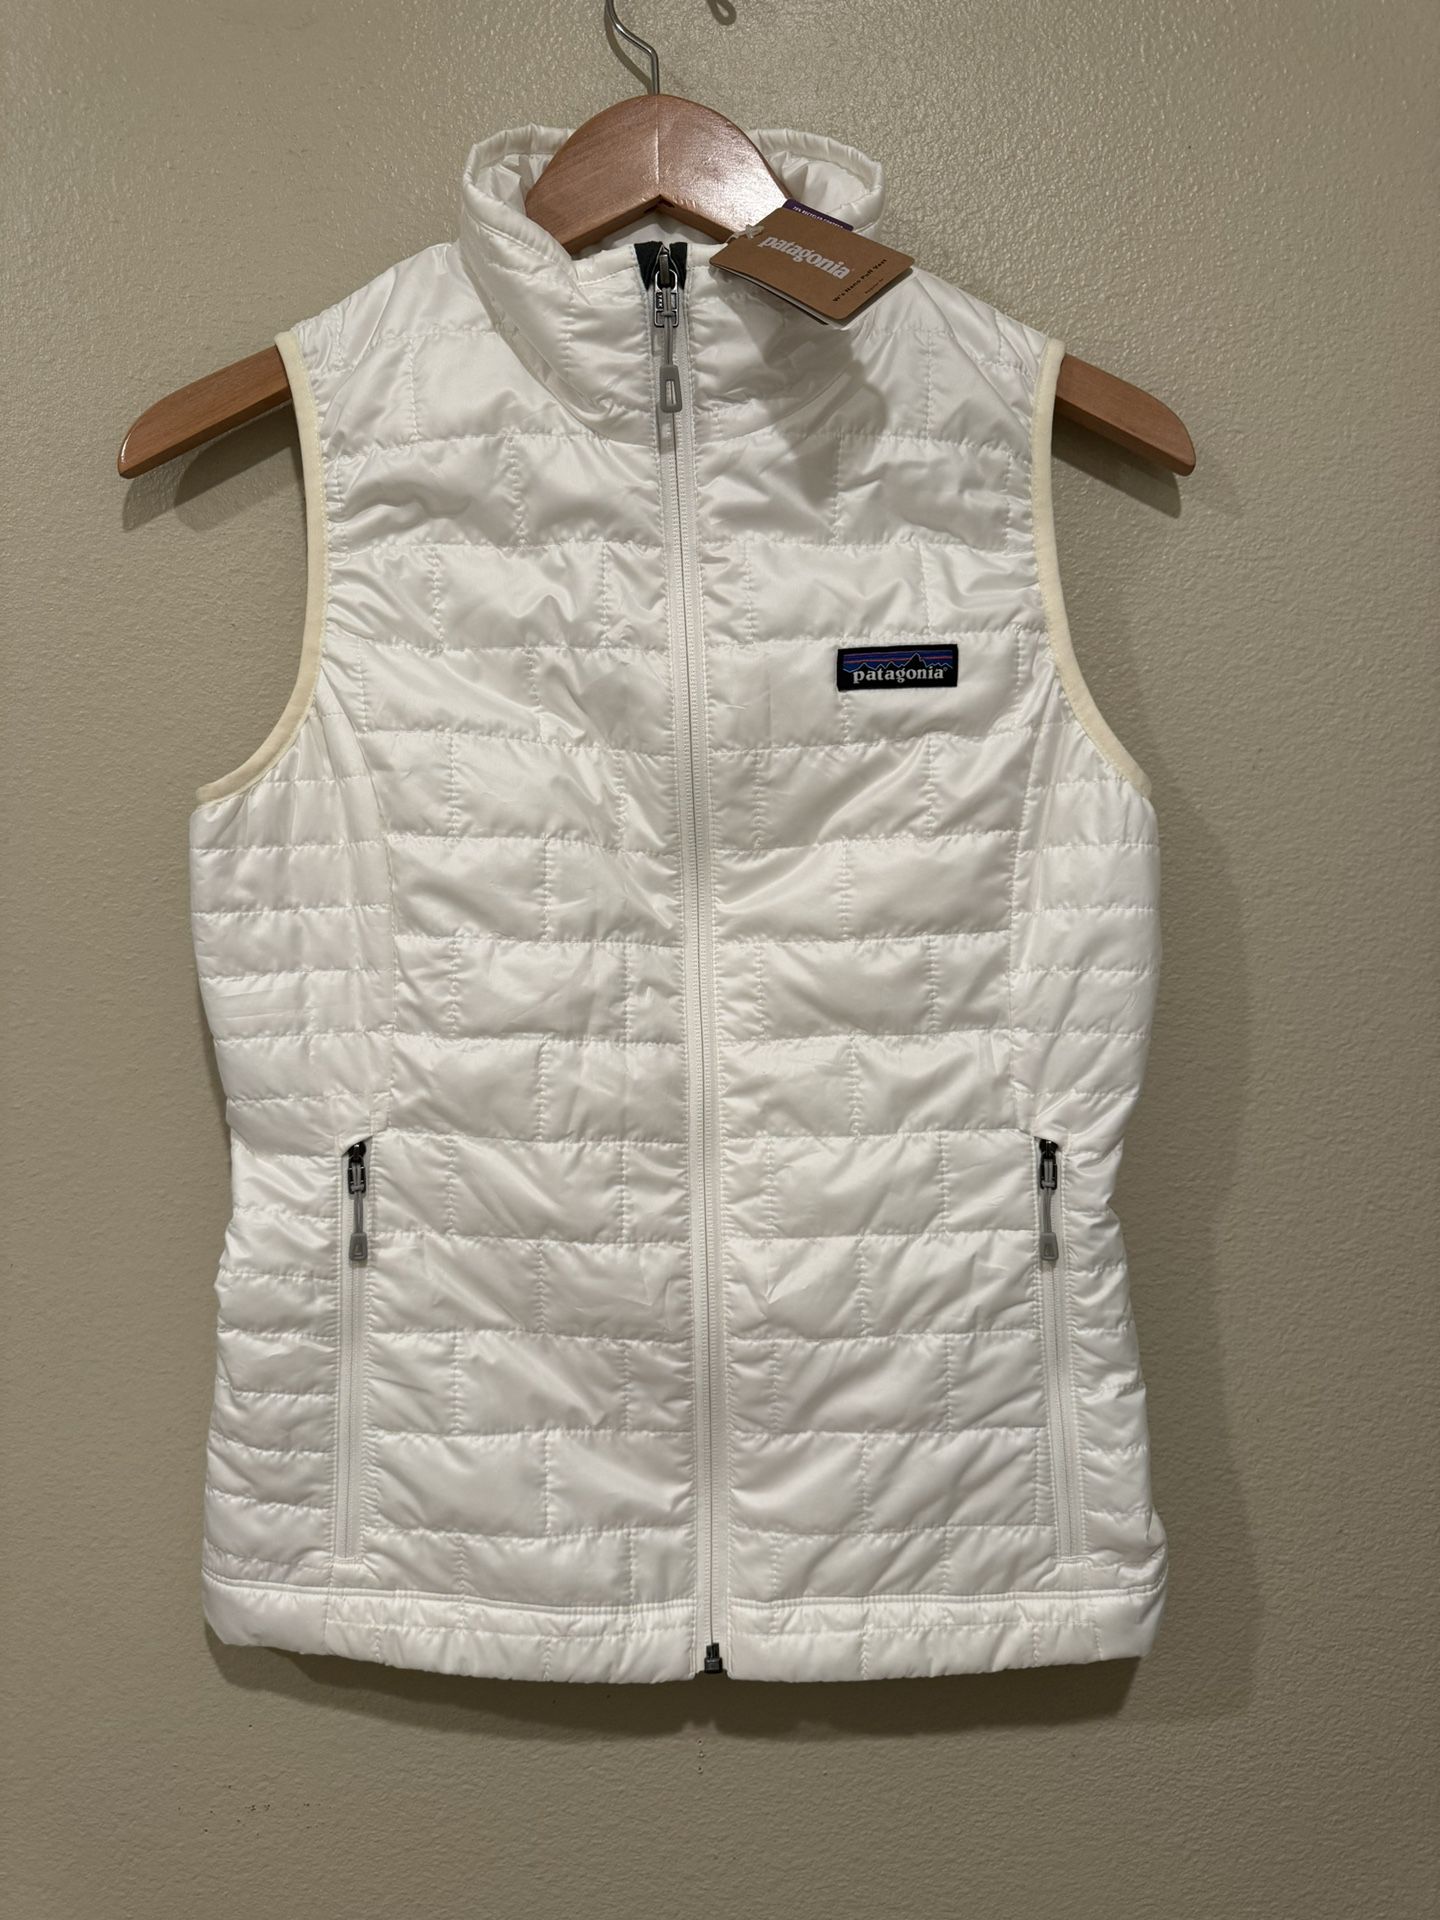 Patagonia Nano Puff Insulated Vest Birch White Woman's Size XS New With Tags Extra Small 